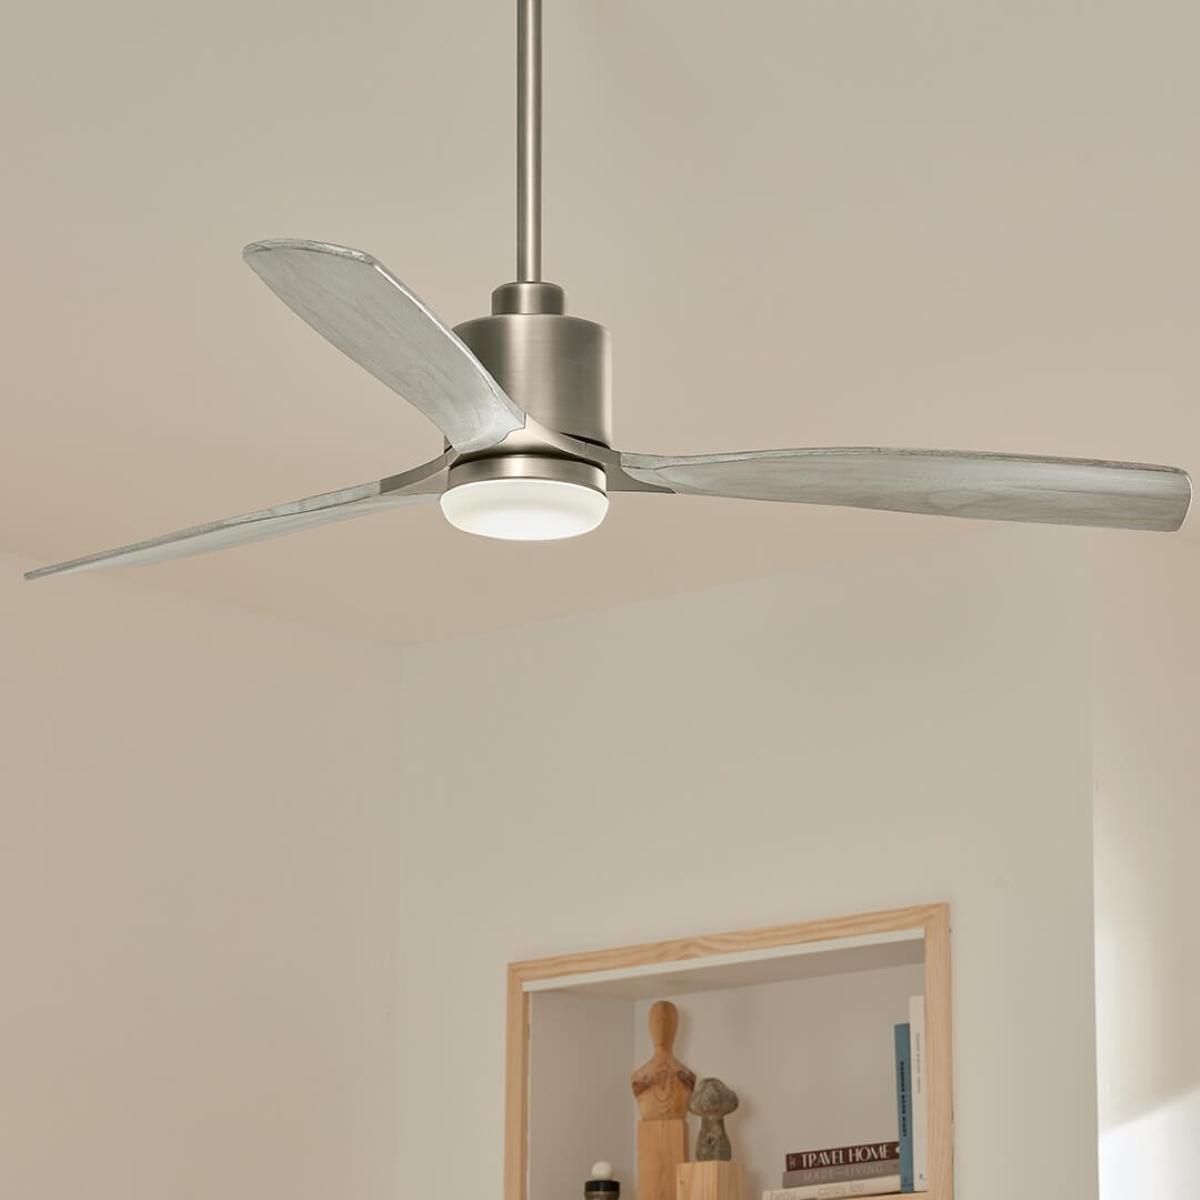 Ridley Ii 60 Inch Propeller Ceiling Fan With Light, Wall Control Included